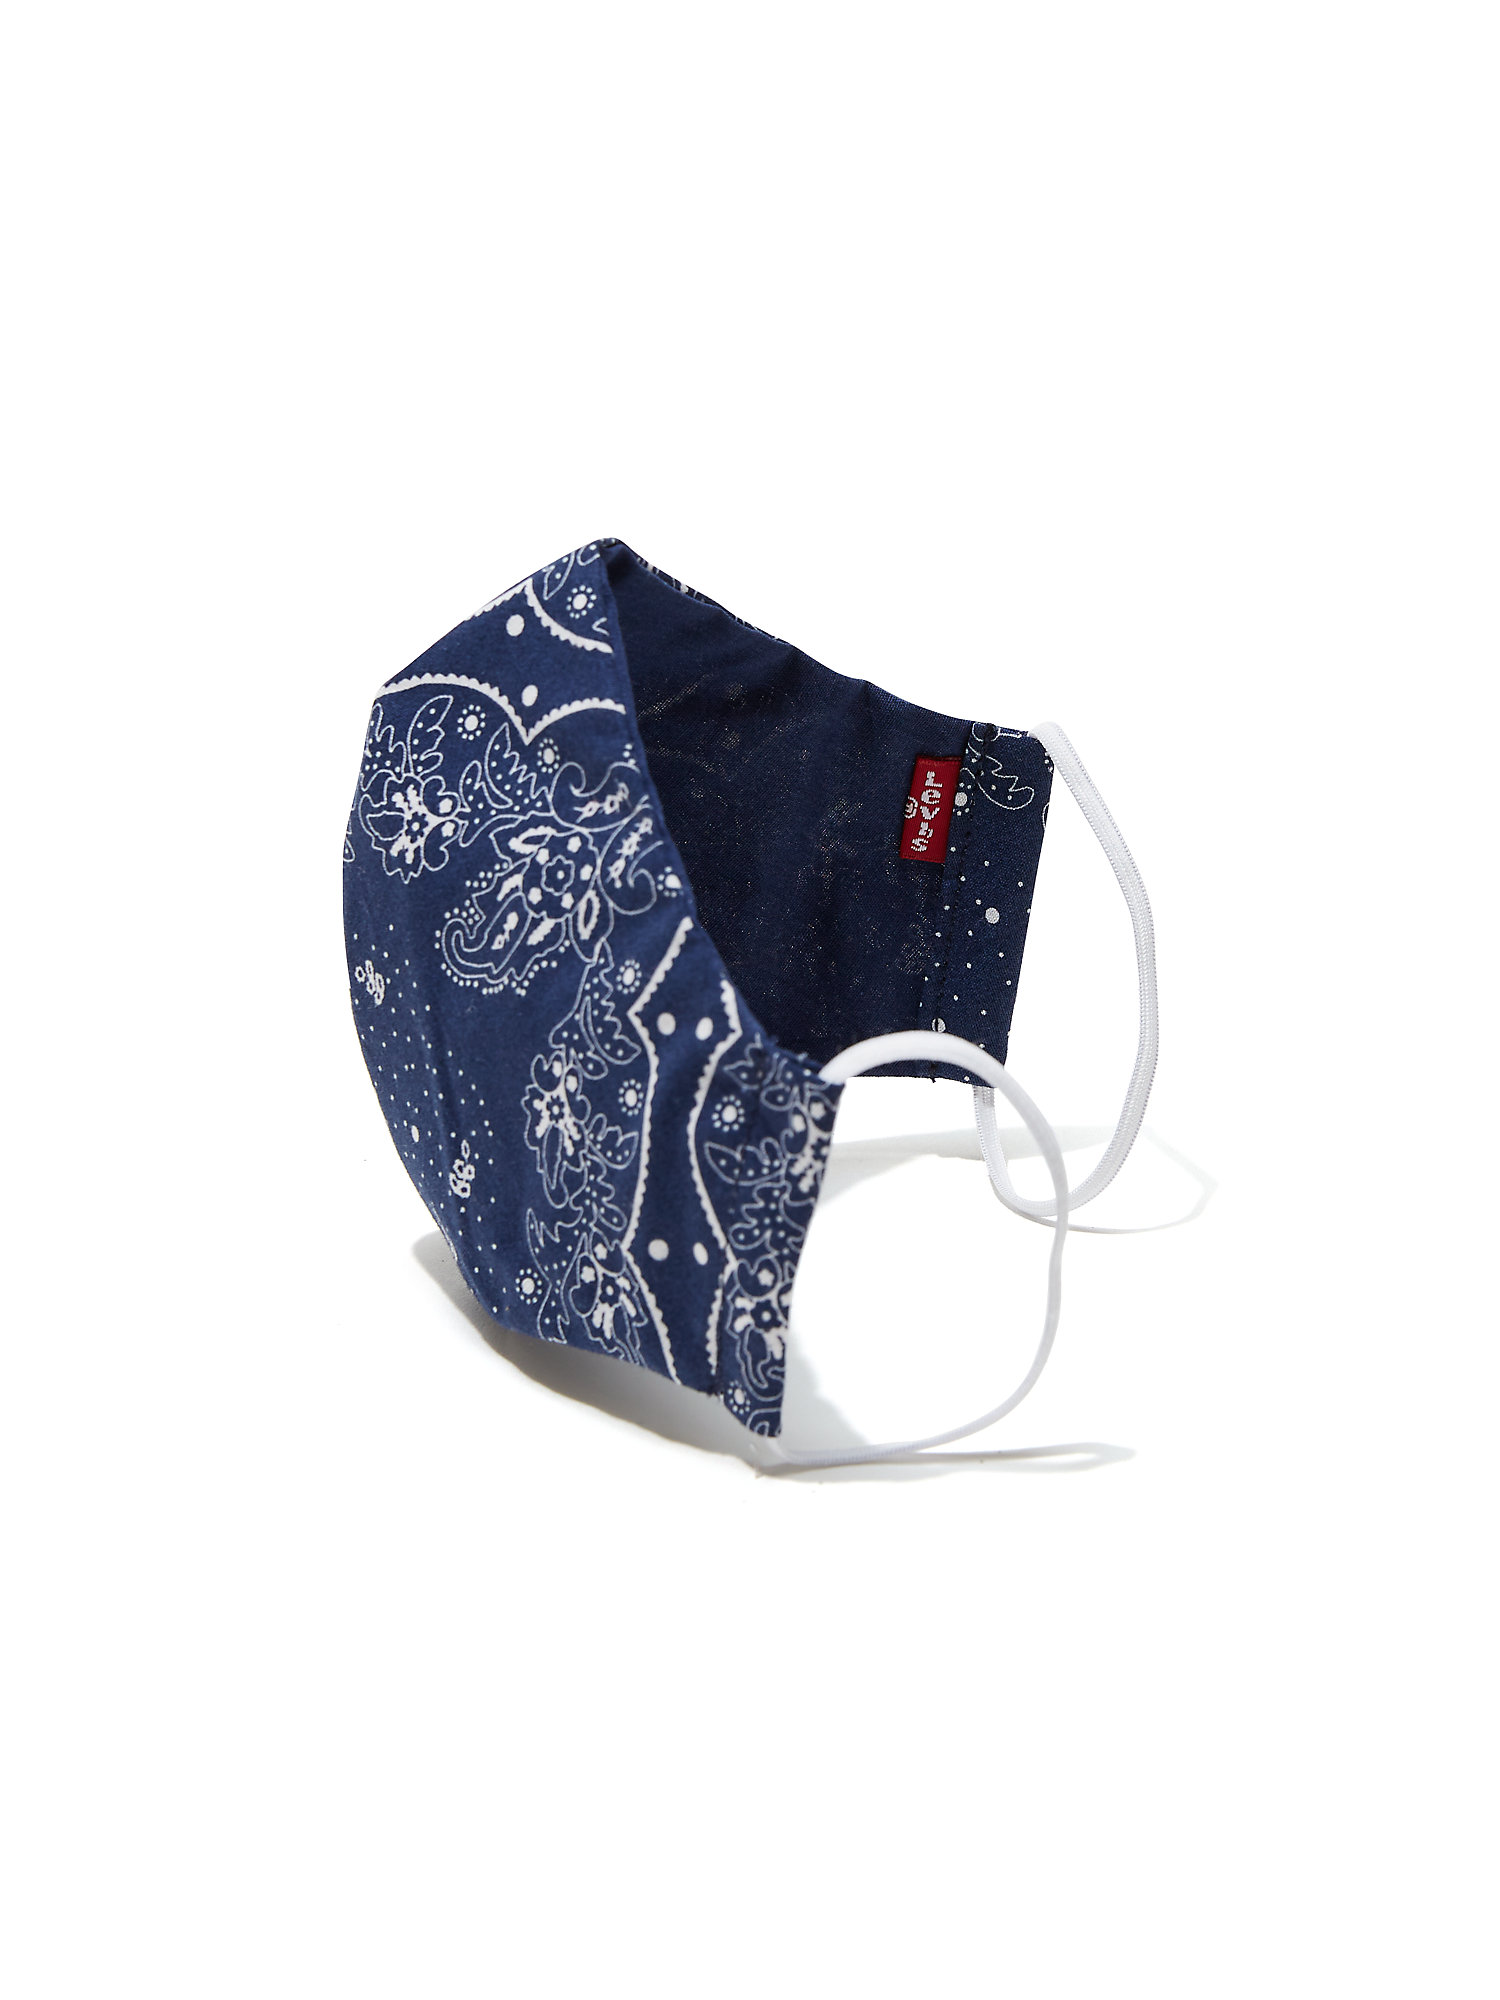 Levi's Reusable Print Face Mask (3 Pack) - image 3 of 4